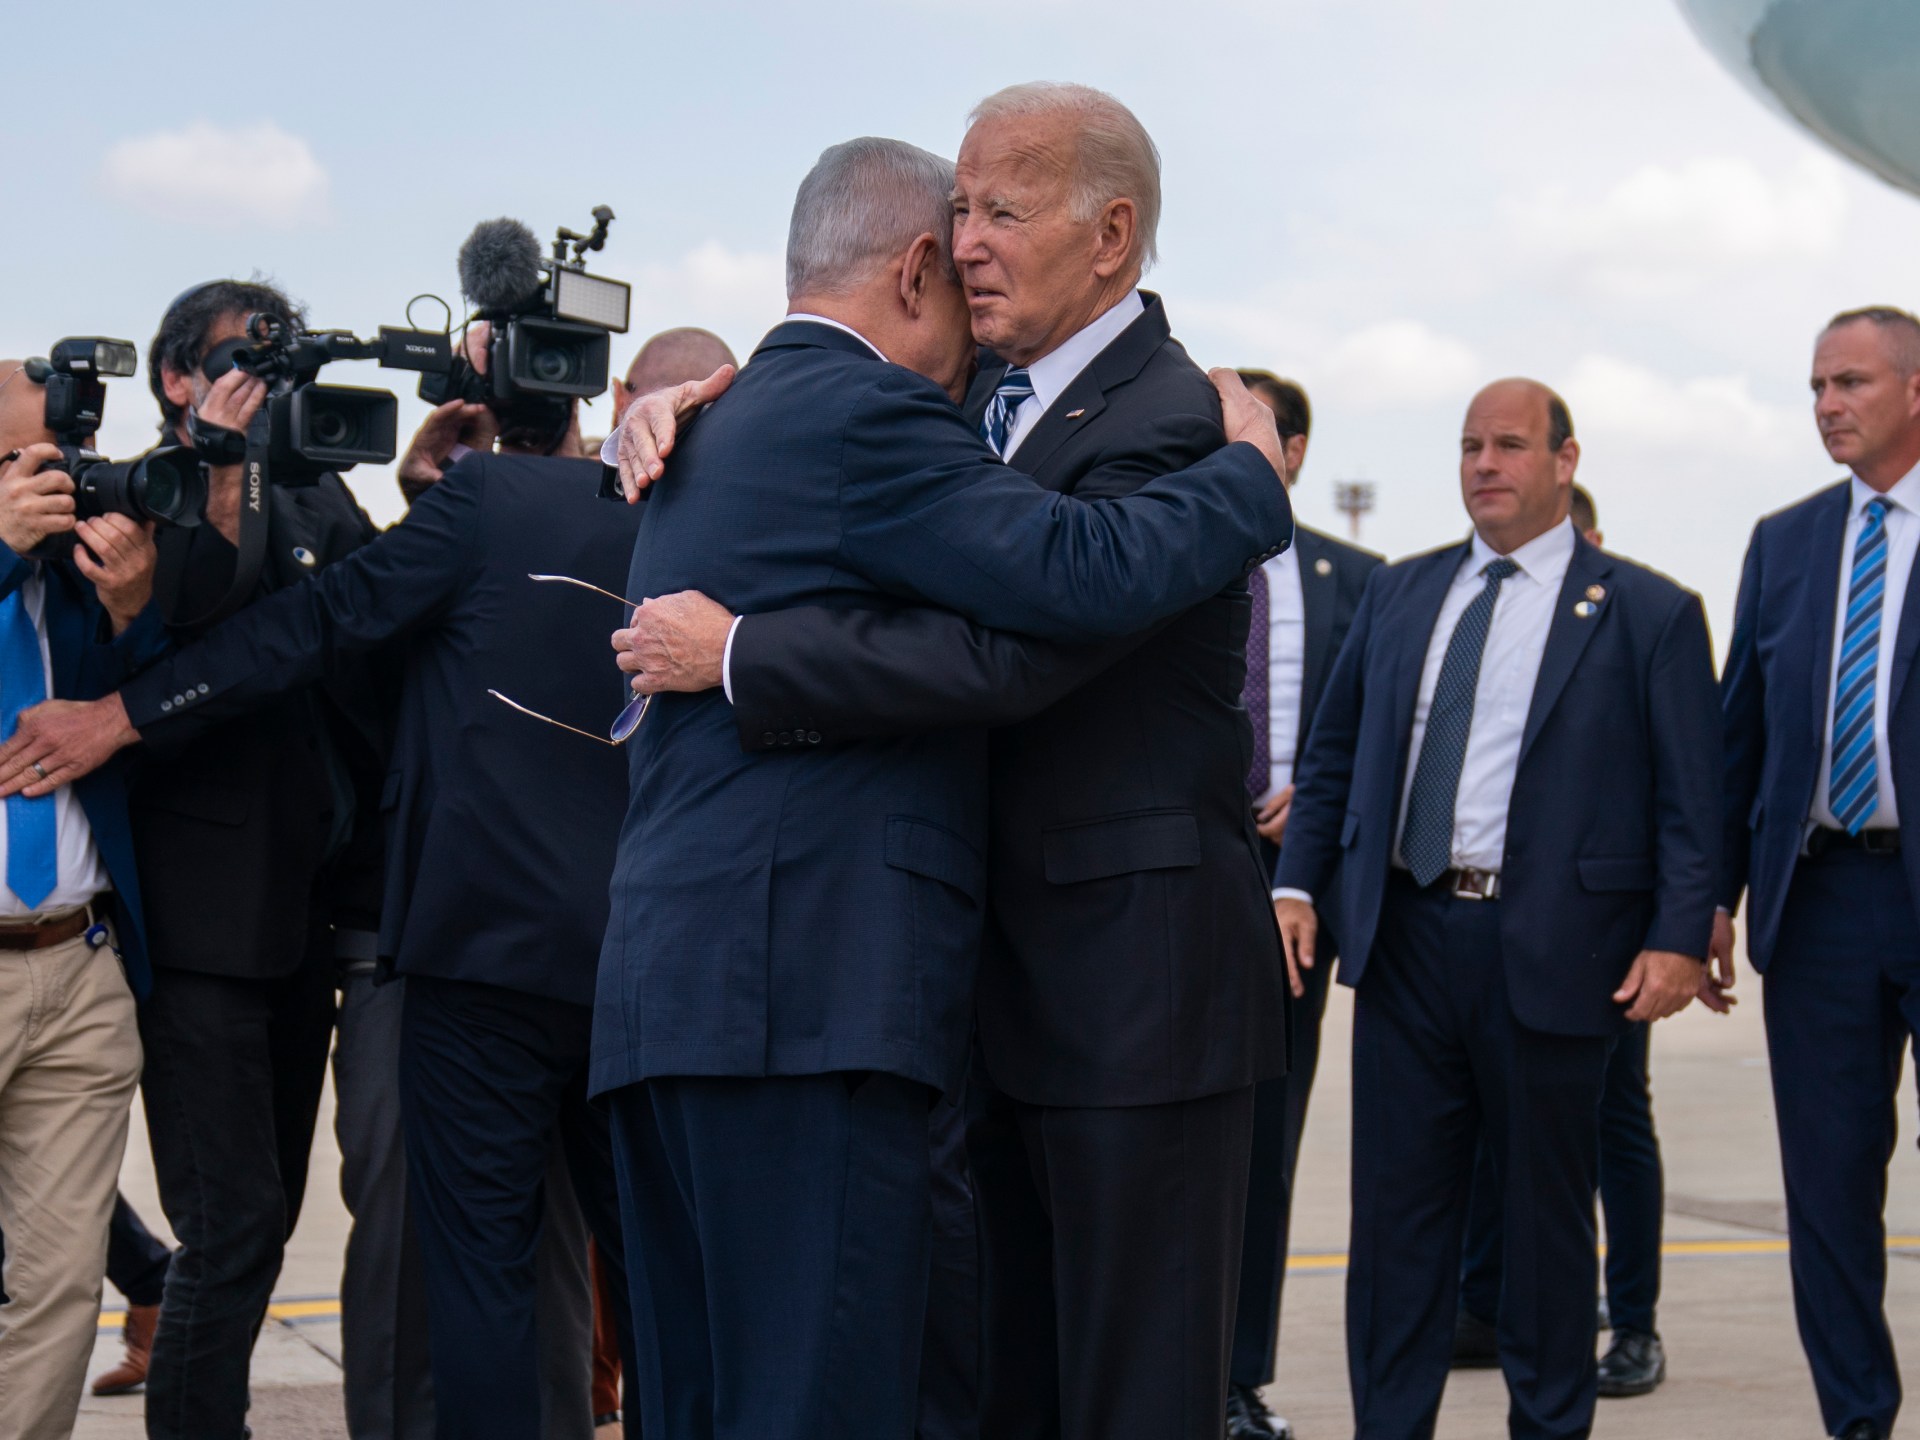 Happily, Joe Biden is finished | Israel-Palestine conflict